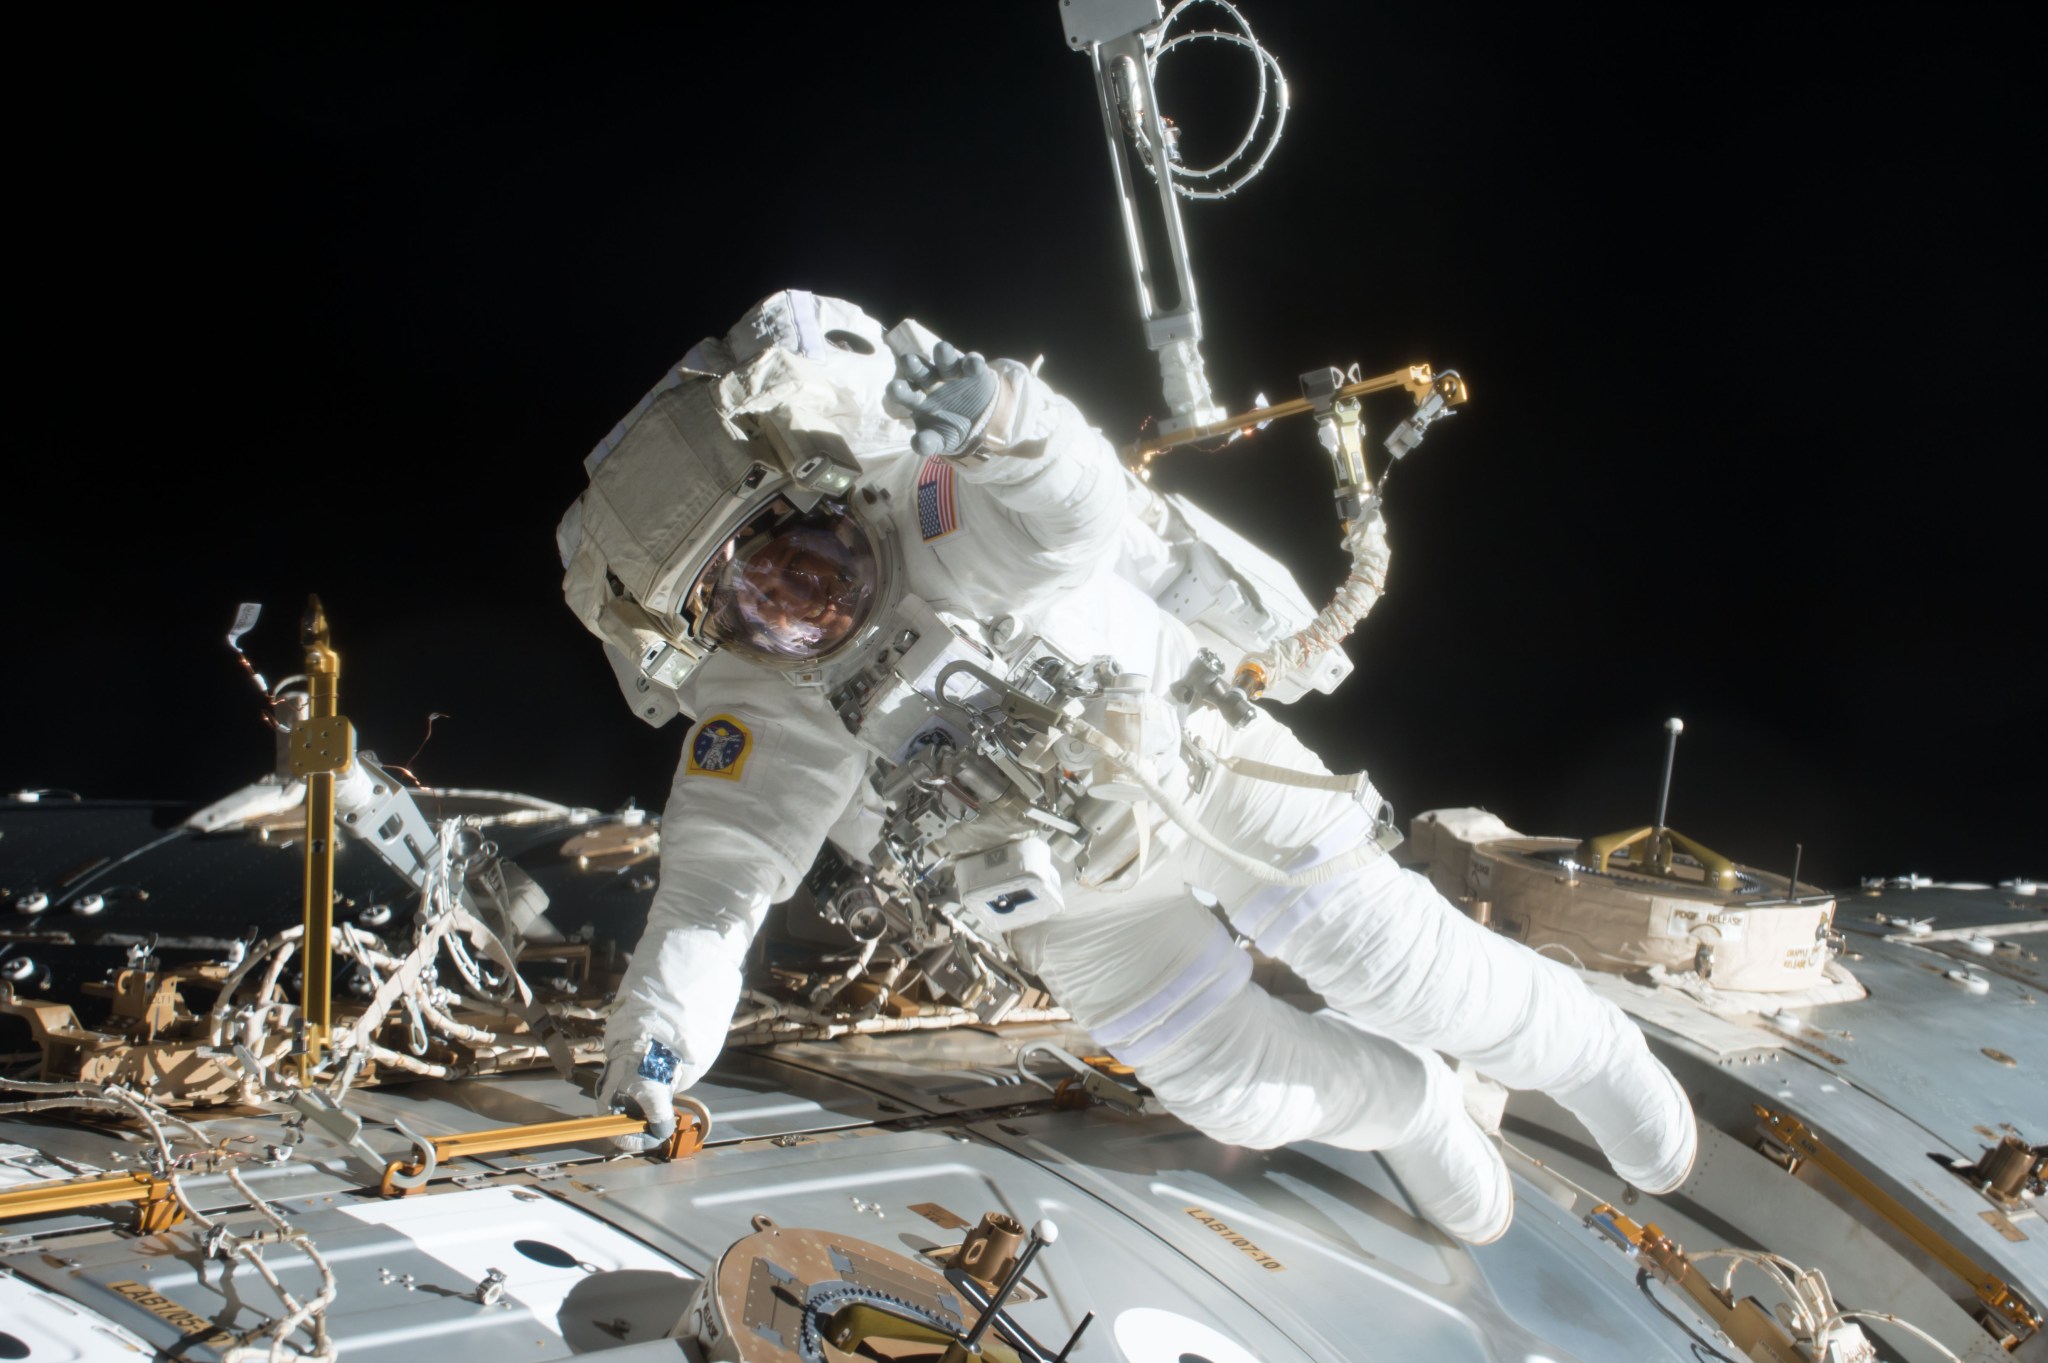 Astronaut Jack Fischer works outside the U.S. Destiny laboratory module to attach wireless antennas on the International Space Station.